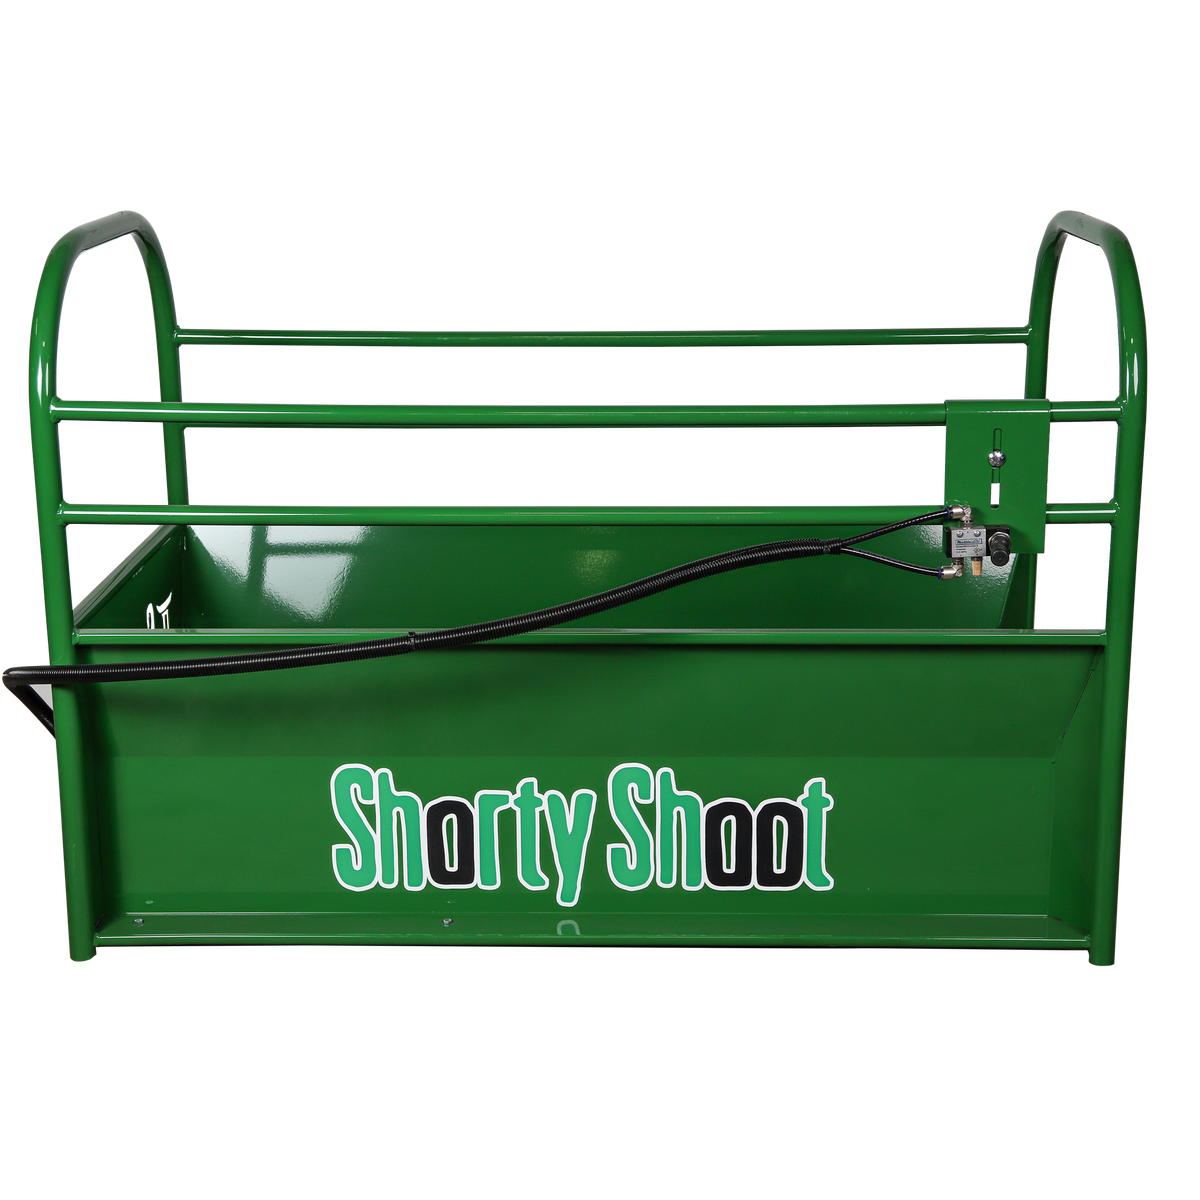 Smarty Shorty Shoot-Roping Supplies-Smarty Roping-Lucky J Boots & More, Women's, Men's, & Kids Western Store Located in Carthage, MO